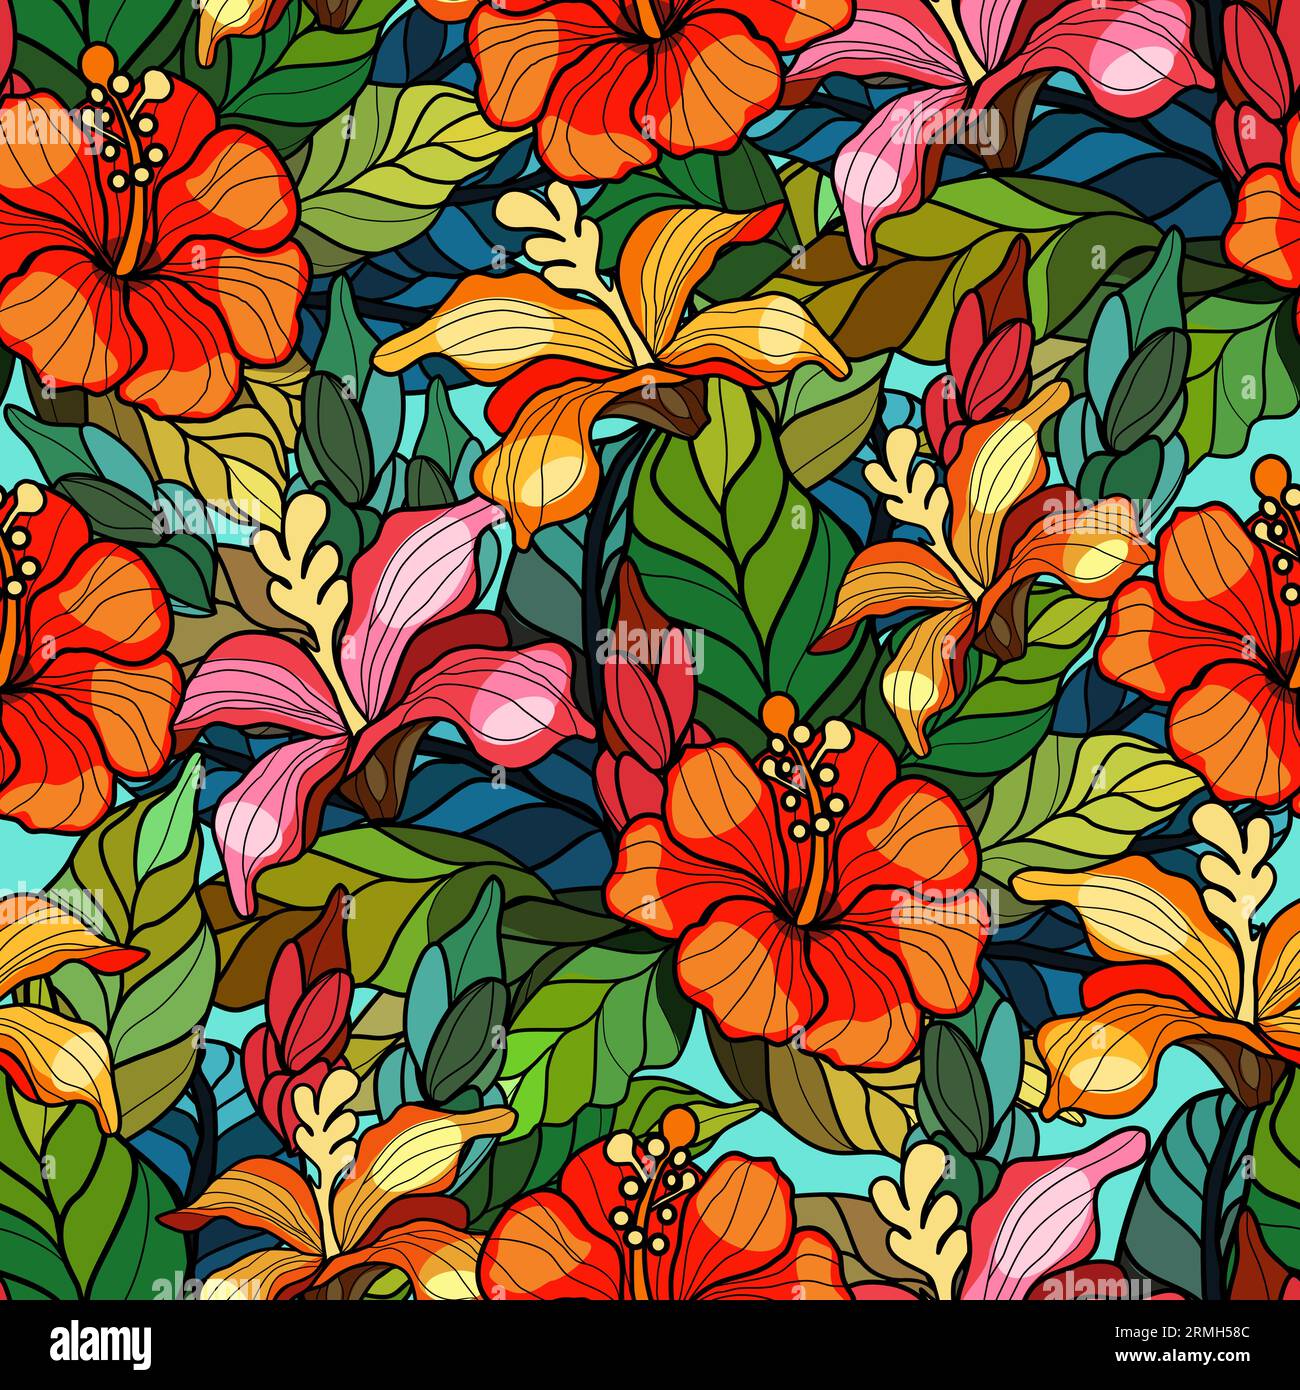 Seamless floral pattern with hibiscus flowers and leaves in stained glass style vector illustration Stock Vector